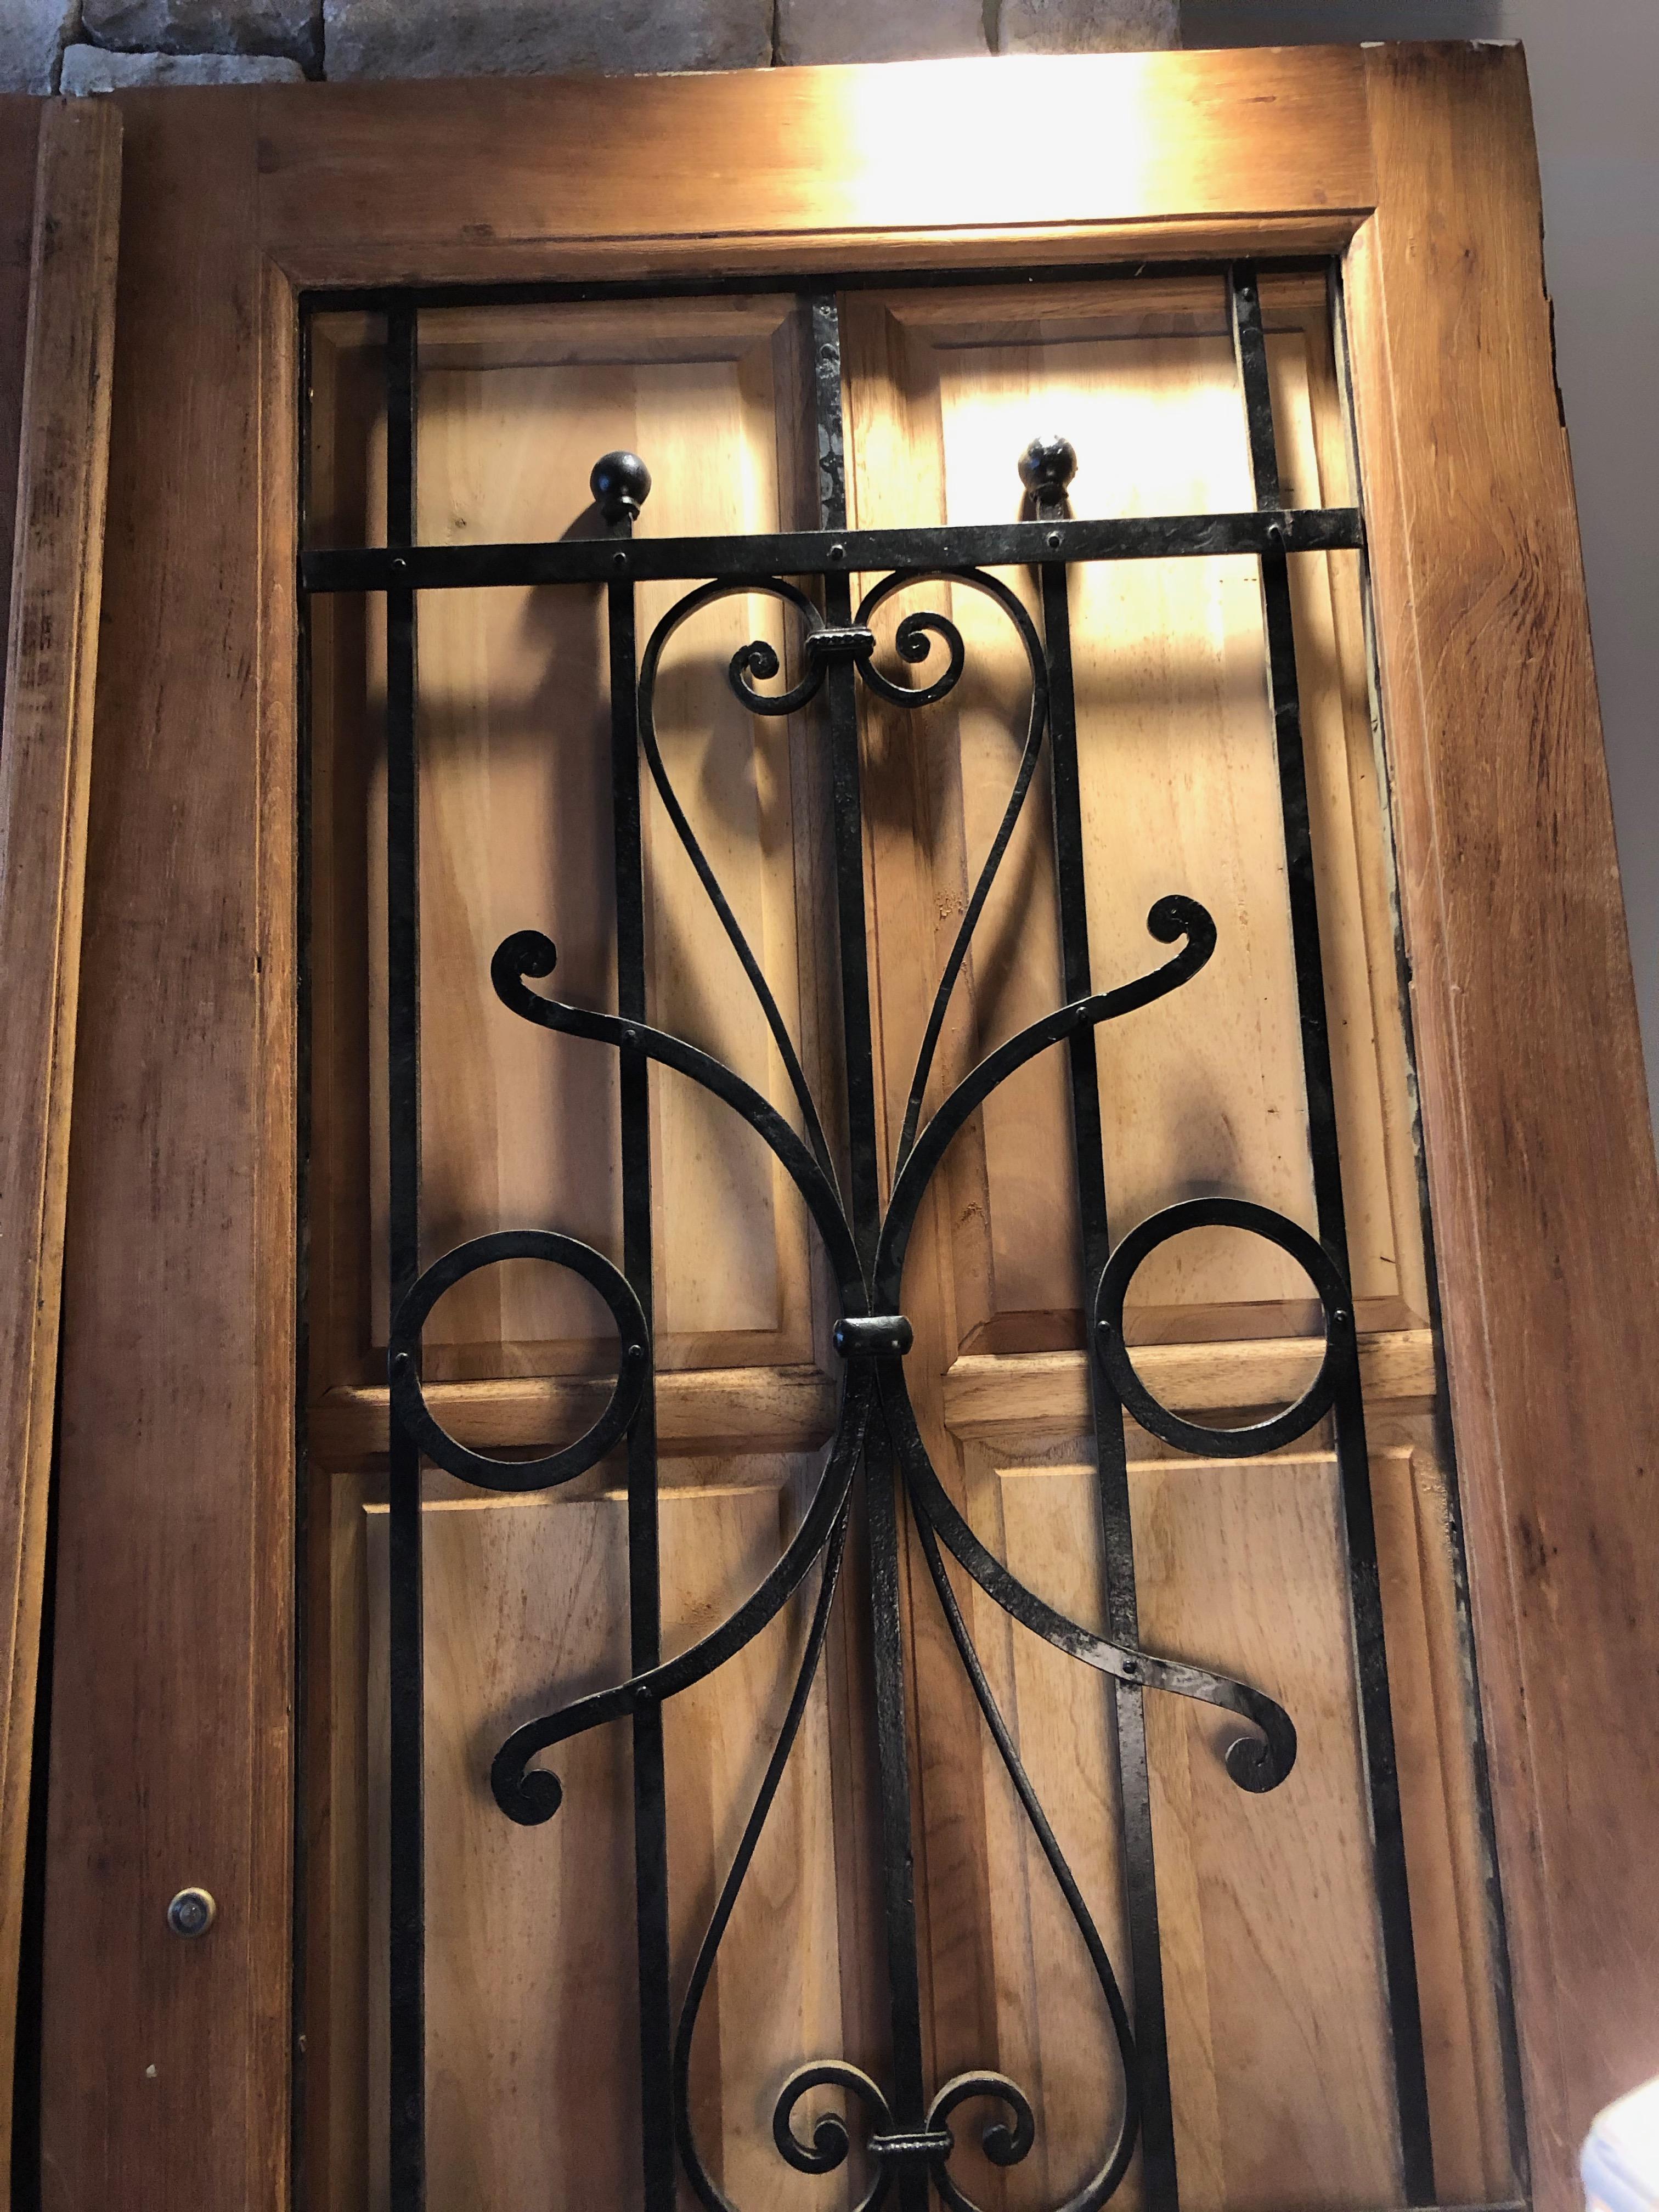 This pair of French chateau doors with brass round extra large handles and mail slit are from Argnon, France, circa 1880. This pair of doors also has the top and sides to mount to the walls (not shown). The top panels open to look out. Glass can be